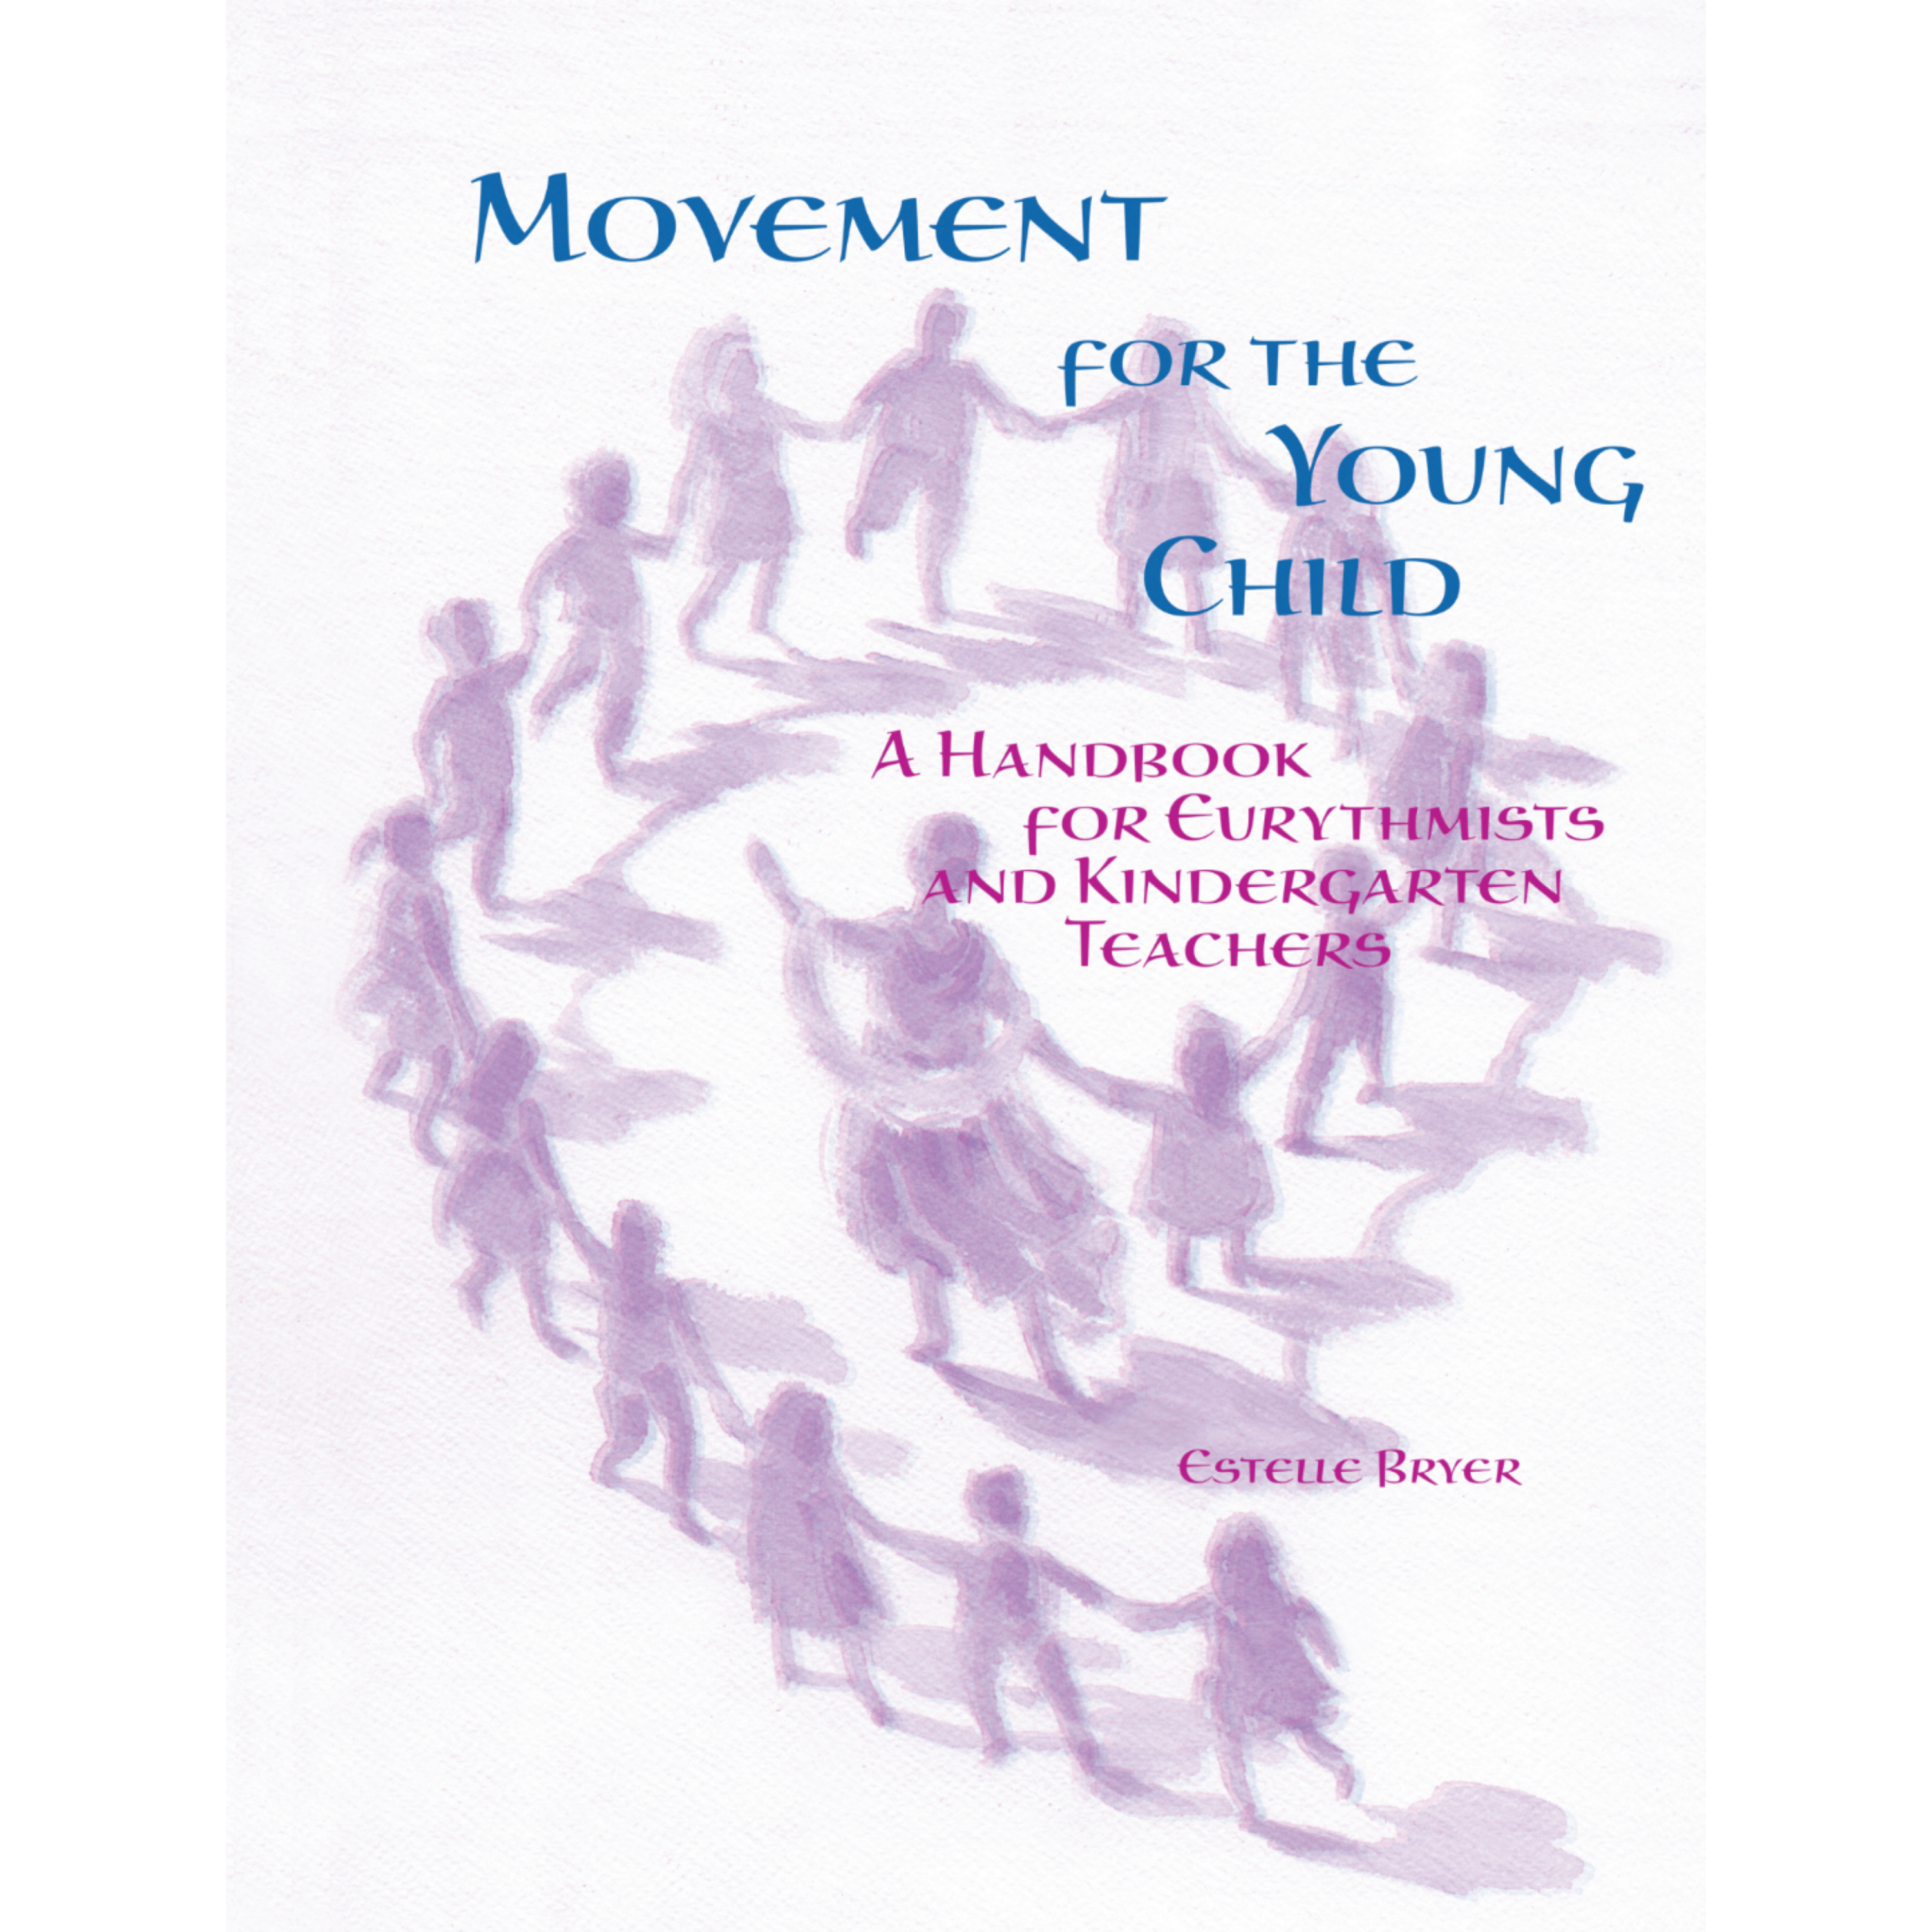 Movement for the Young Child - A Handbook for Eurythmists and Kindergarten Teachers